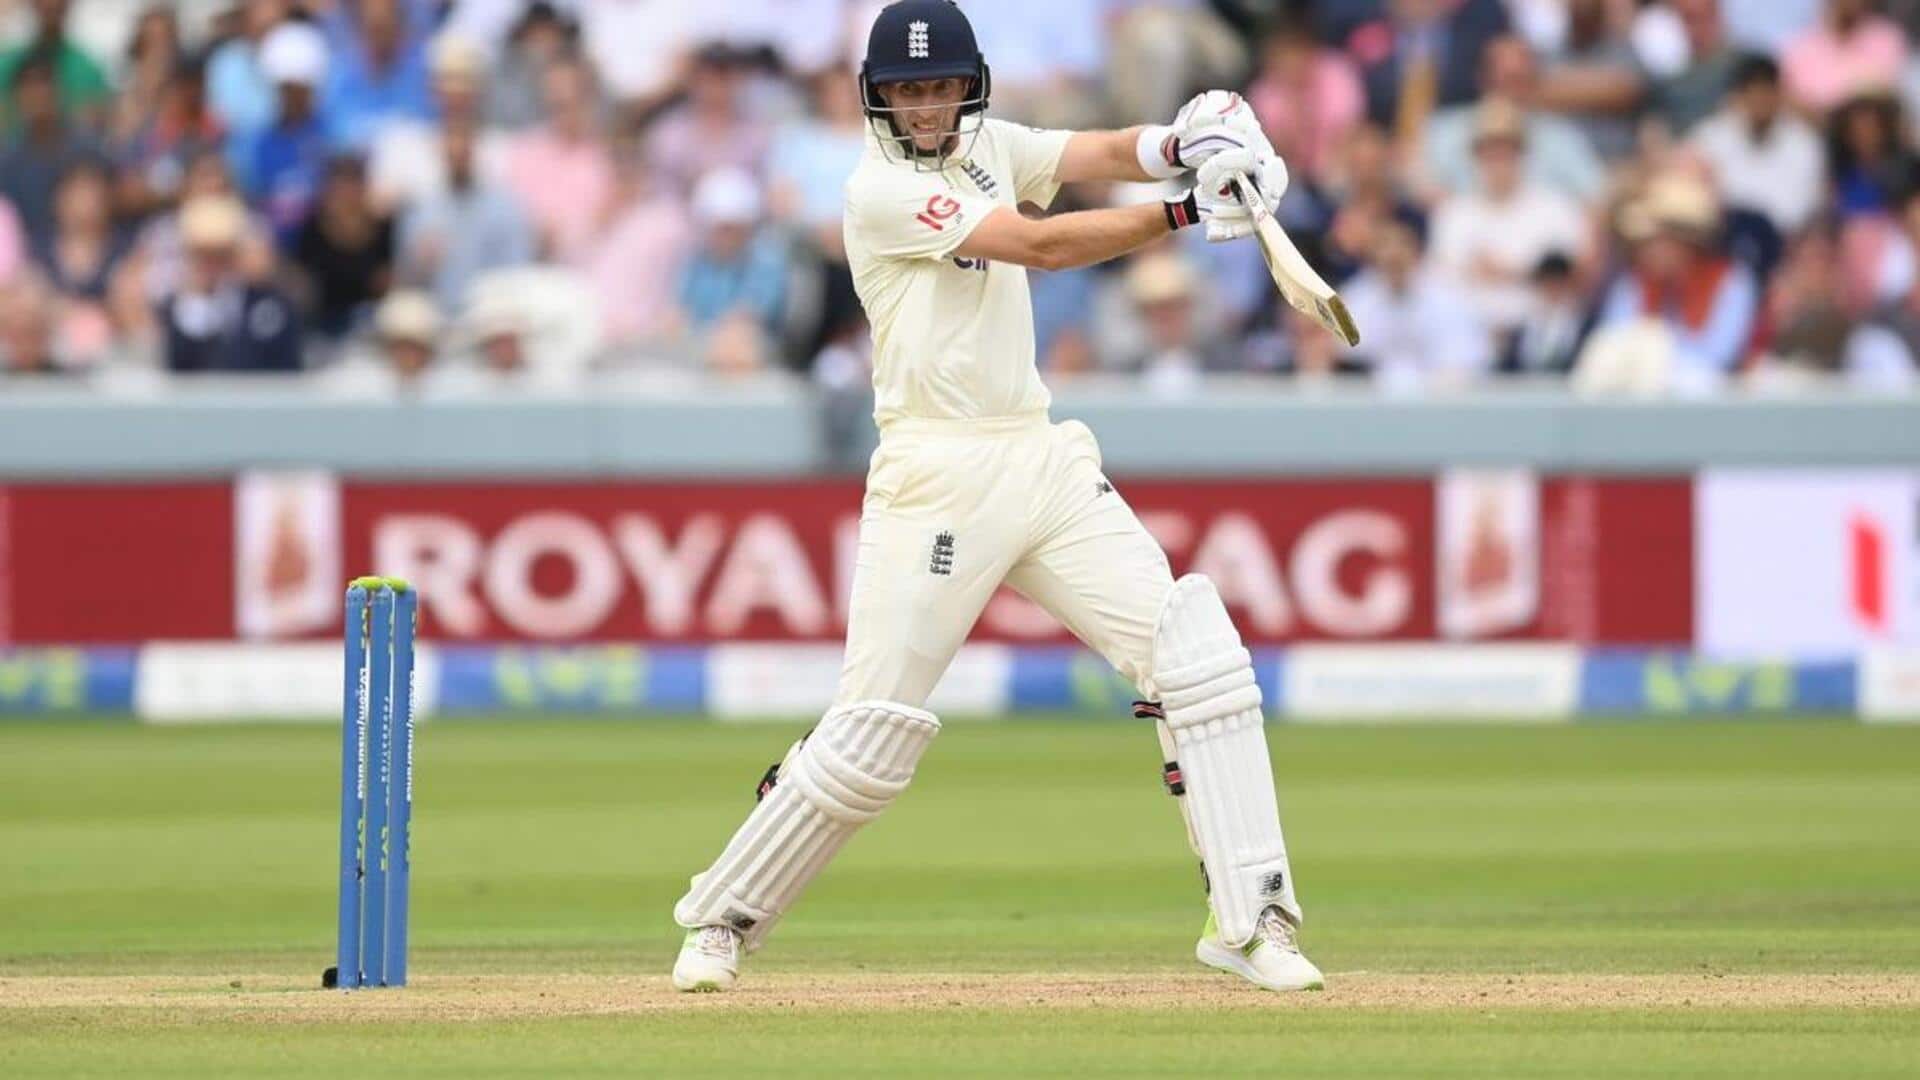 Joe Root can accomplish these milestones in India Tests